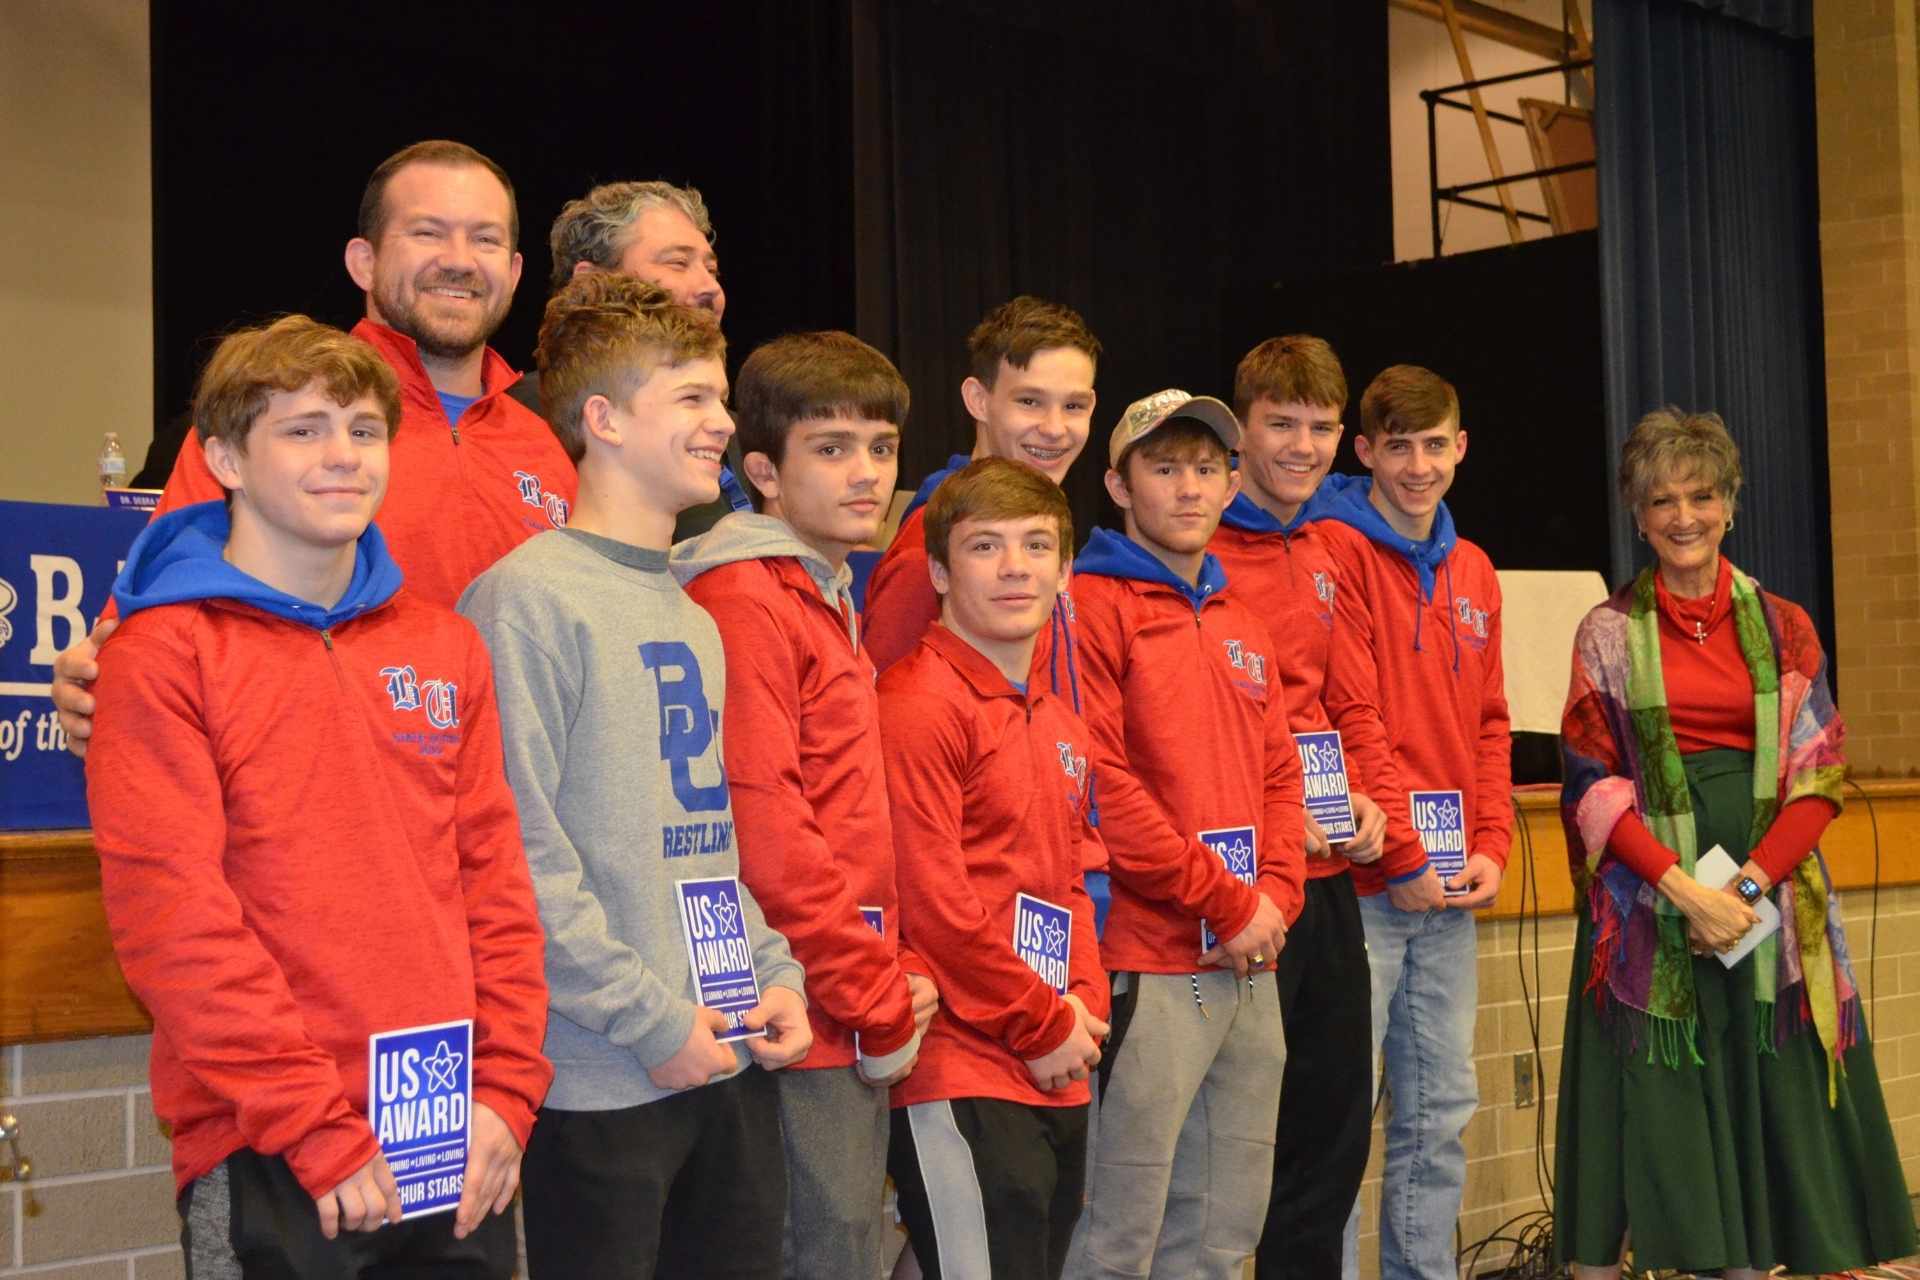 Upshur Stars are presented by Upshur County Schools Assistant Superintendent Dr. Debra Harrison to Buckhannon-Upshur High School wrestling state qualifiers and their coaches during Tuesday’s Upshur County Board of Education meeting held at the school. Qualifiers include Nathan Tyson, Ian Cornett, Liam Garcia, Aidan Wilson, Brodie Kennedy, Tucker Hurst, Andrew McDowell, Nathan Cornett, Luke Bohnsack, Trevor Randolph and Oscar Blonn. The B-UHS wrestling head coach is Jacob Orr and the assistant coaches are Levi Bender and Craig Wallace.